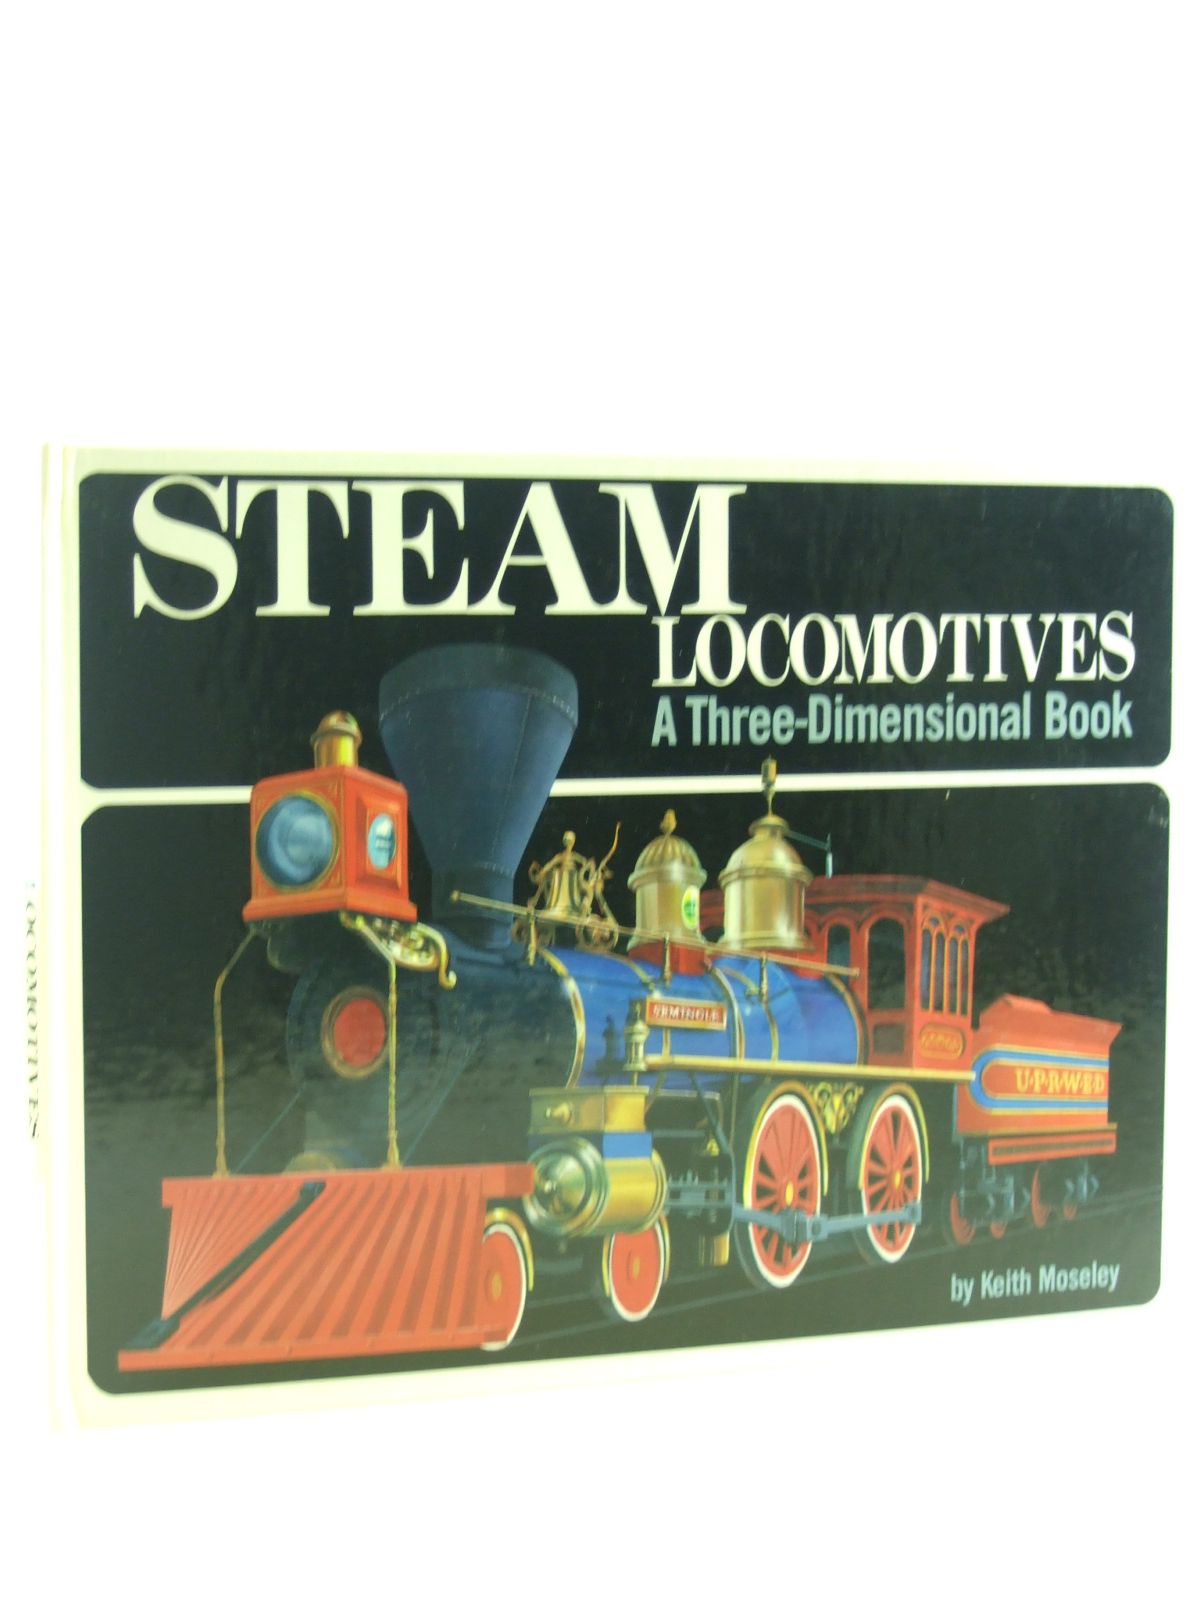 Photo of STEAM LOCOMOTIVES A THREE-DIMENSIONAL BOOK written by Moseley, Keith
Whitehouse, Alan illustrated by Bartle, Brian
Watson, Brian published by William Collins Sons & Co. Ltd. (STOCK CODE: 1107151)  for sale by Stella & Rose's Books